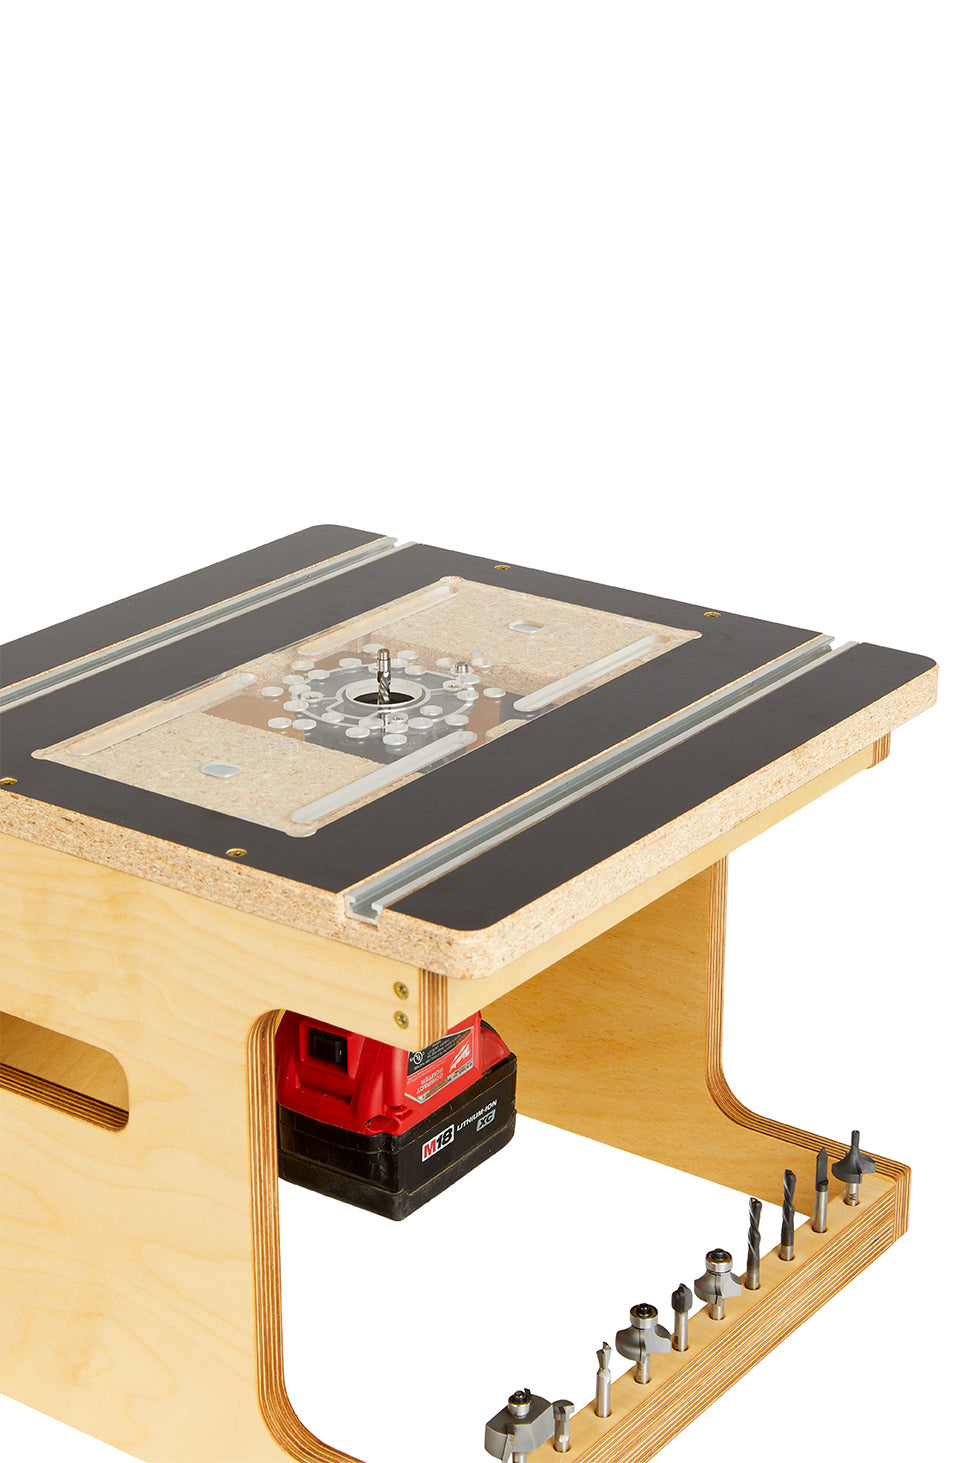 Benchtop Trim Router Table – PLAN